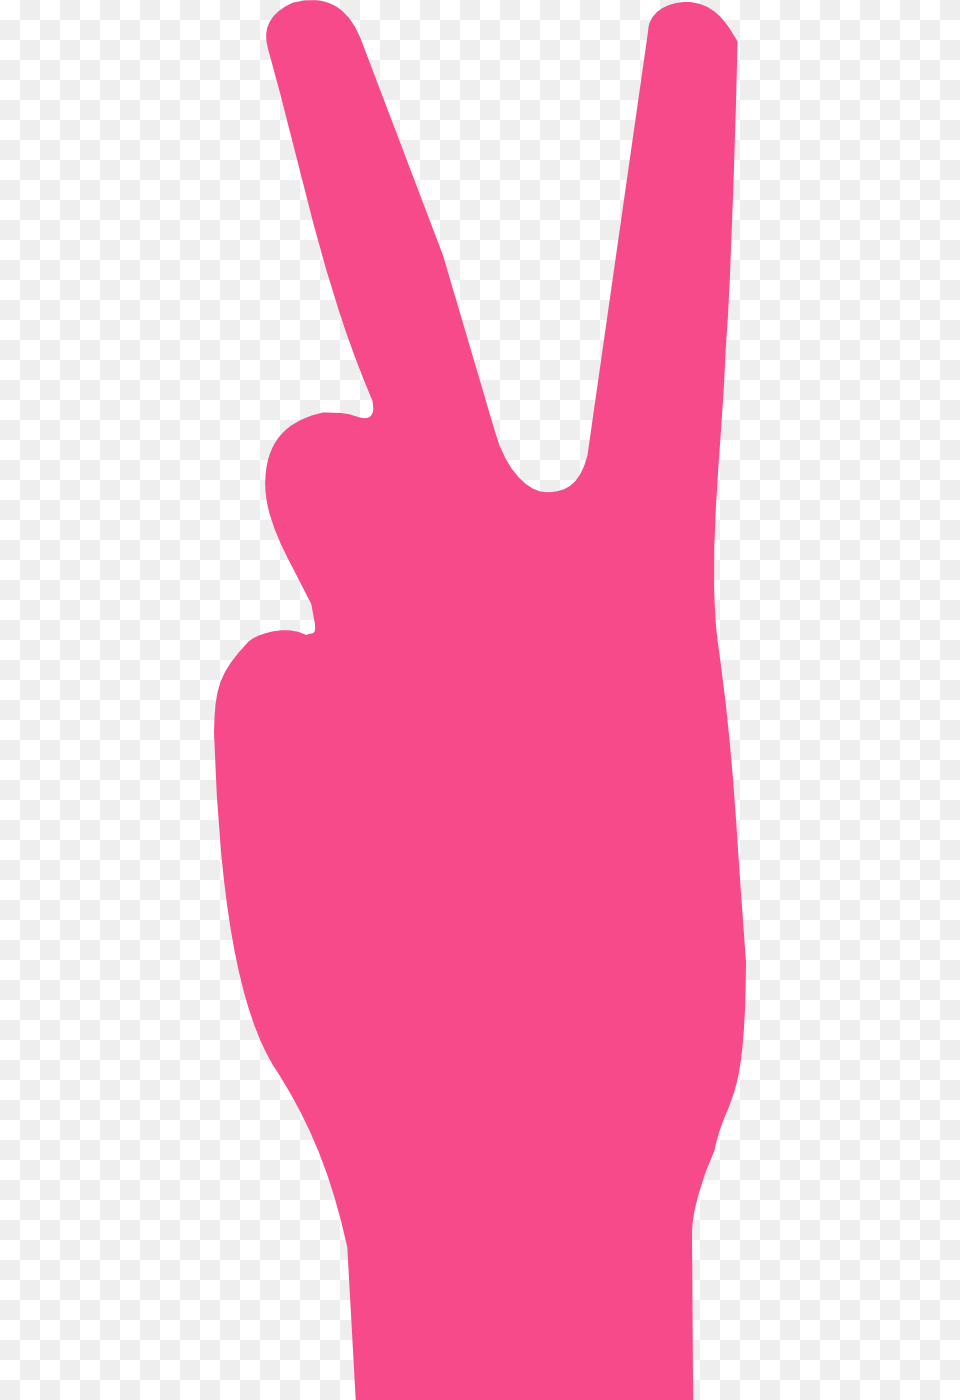 French Rose V Sign Peace Flower Svg Scalable Vector Scalable Vector Graphics, Clothing, Glove, Body Part, Hand Free Png Download